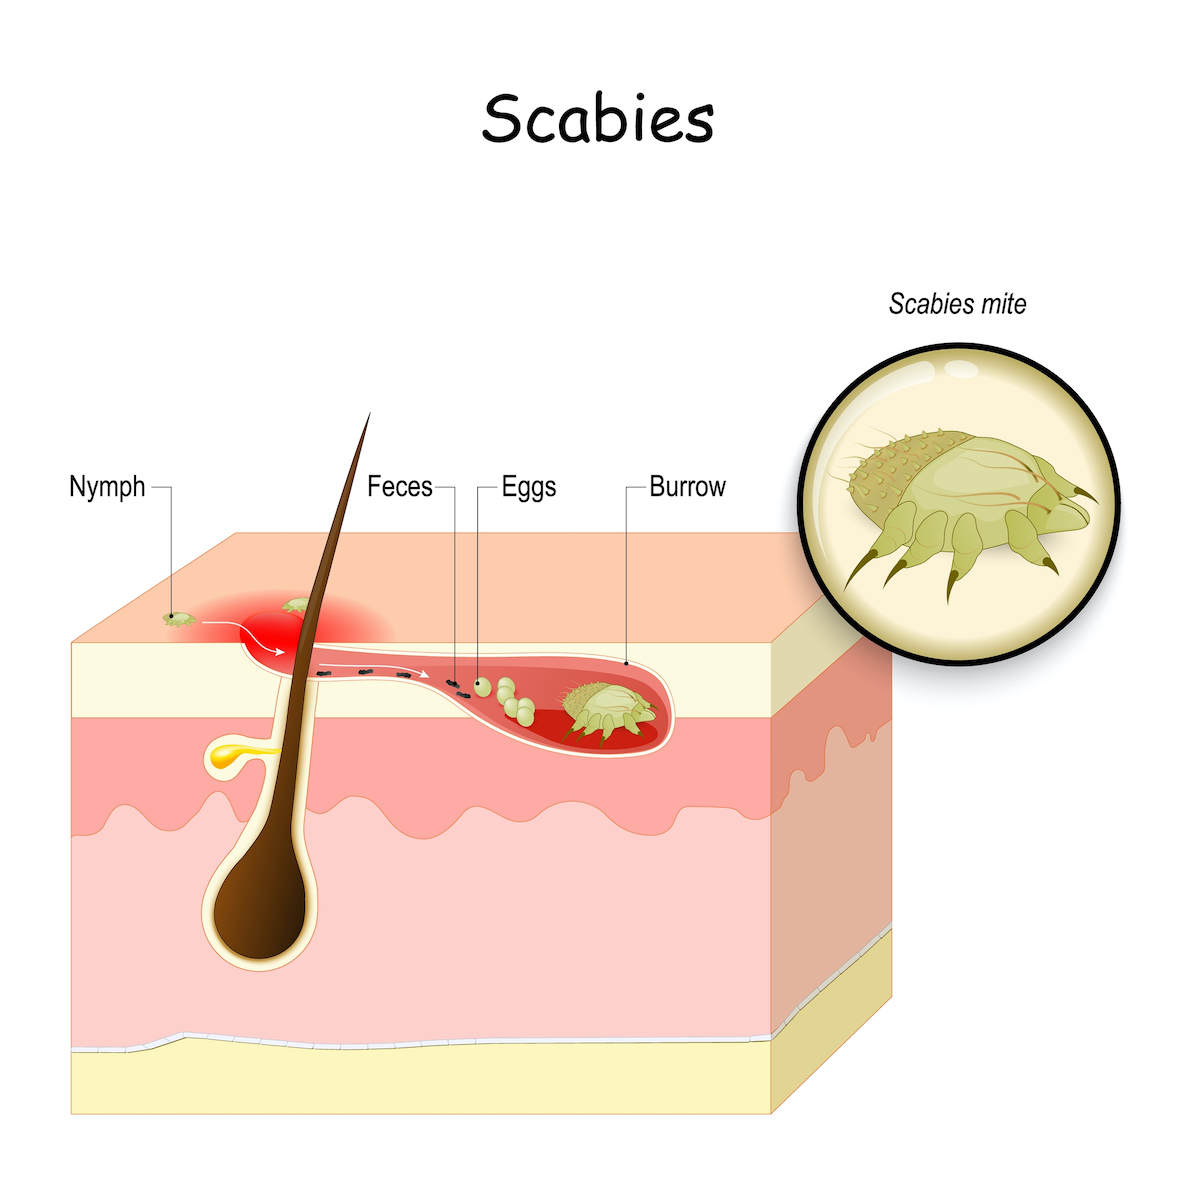 Scabies. seven-year itch is a contagious skin infestation by the mite Sarcoptes scabiei. Skin with eggs and mite in a burrow. Close-up of Scabies mite. Vector illustration